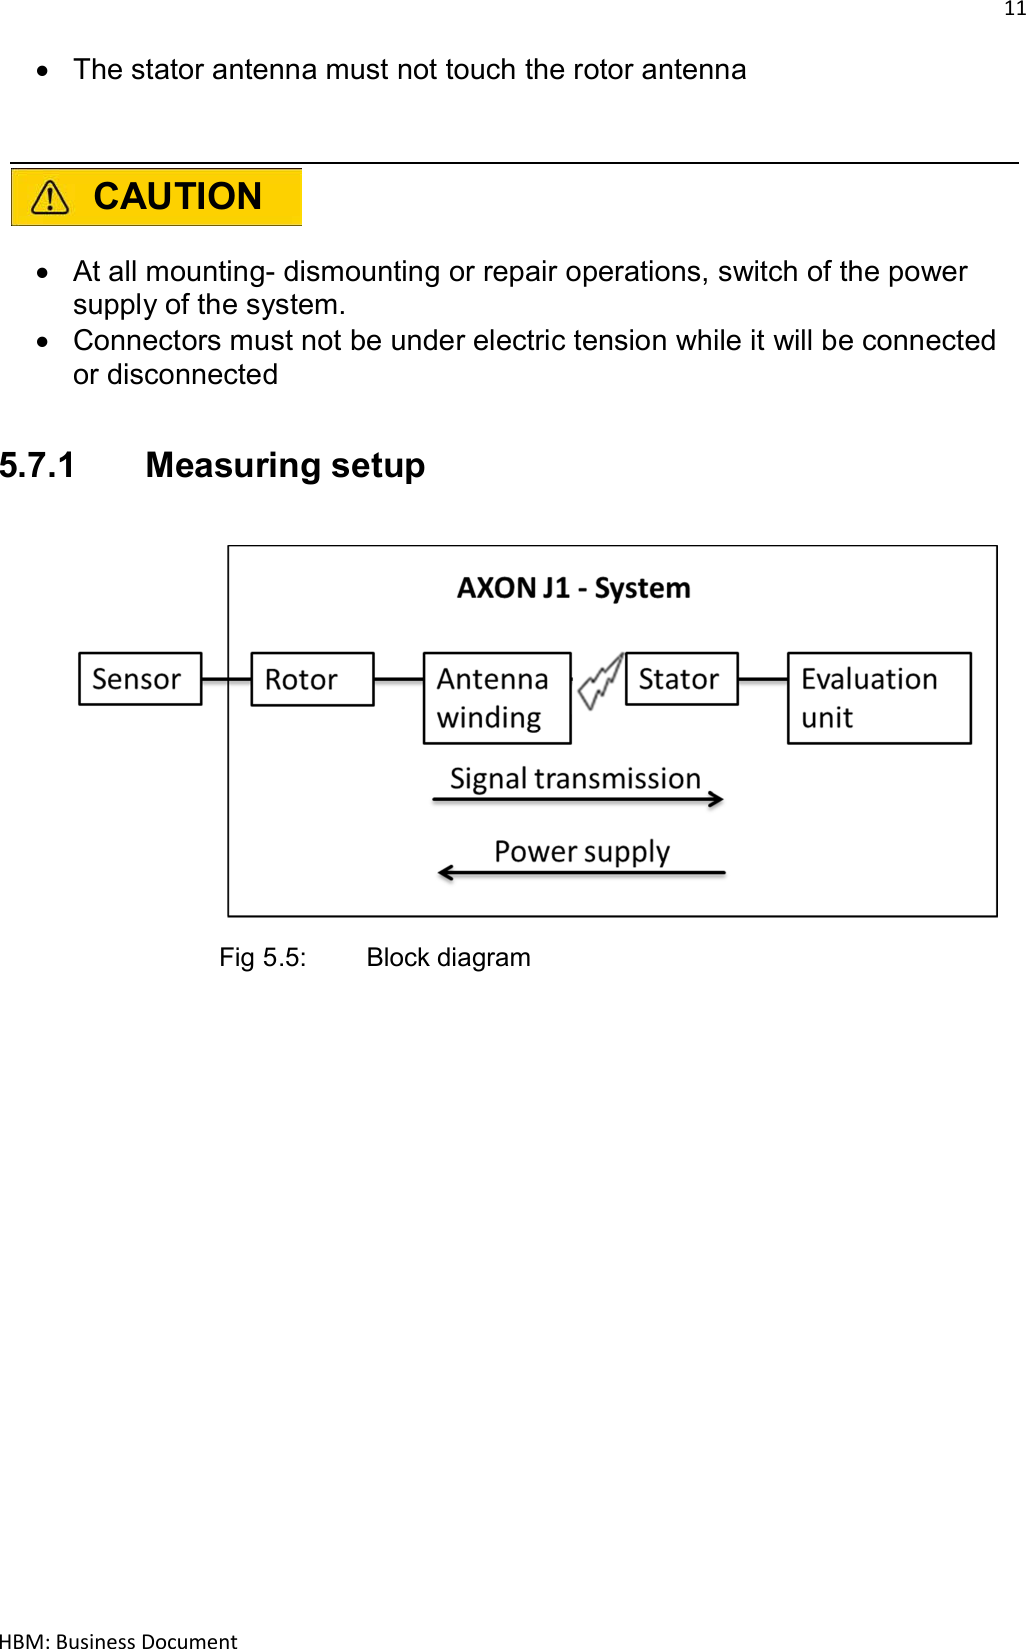 11  HBM: Business Document   The stator antenna must not touch the rotor antenna    CAUTION    At all mounting- dismounting or repair operations, switch of the power supply of the system.   Connectors must not be under electric tension while it will be connected or disconnected  5.7.1  Measuring setup       Fig 5.5:   Block diagram     